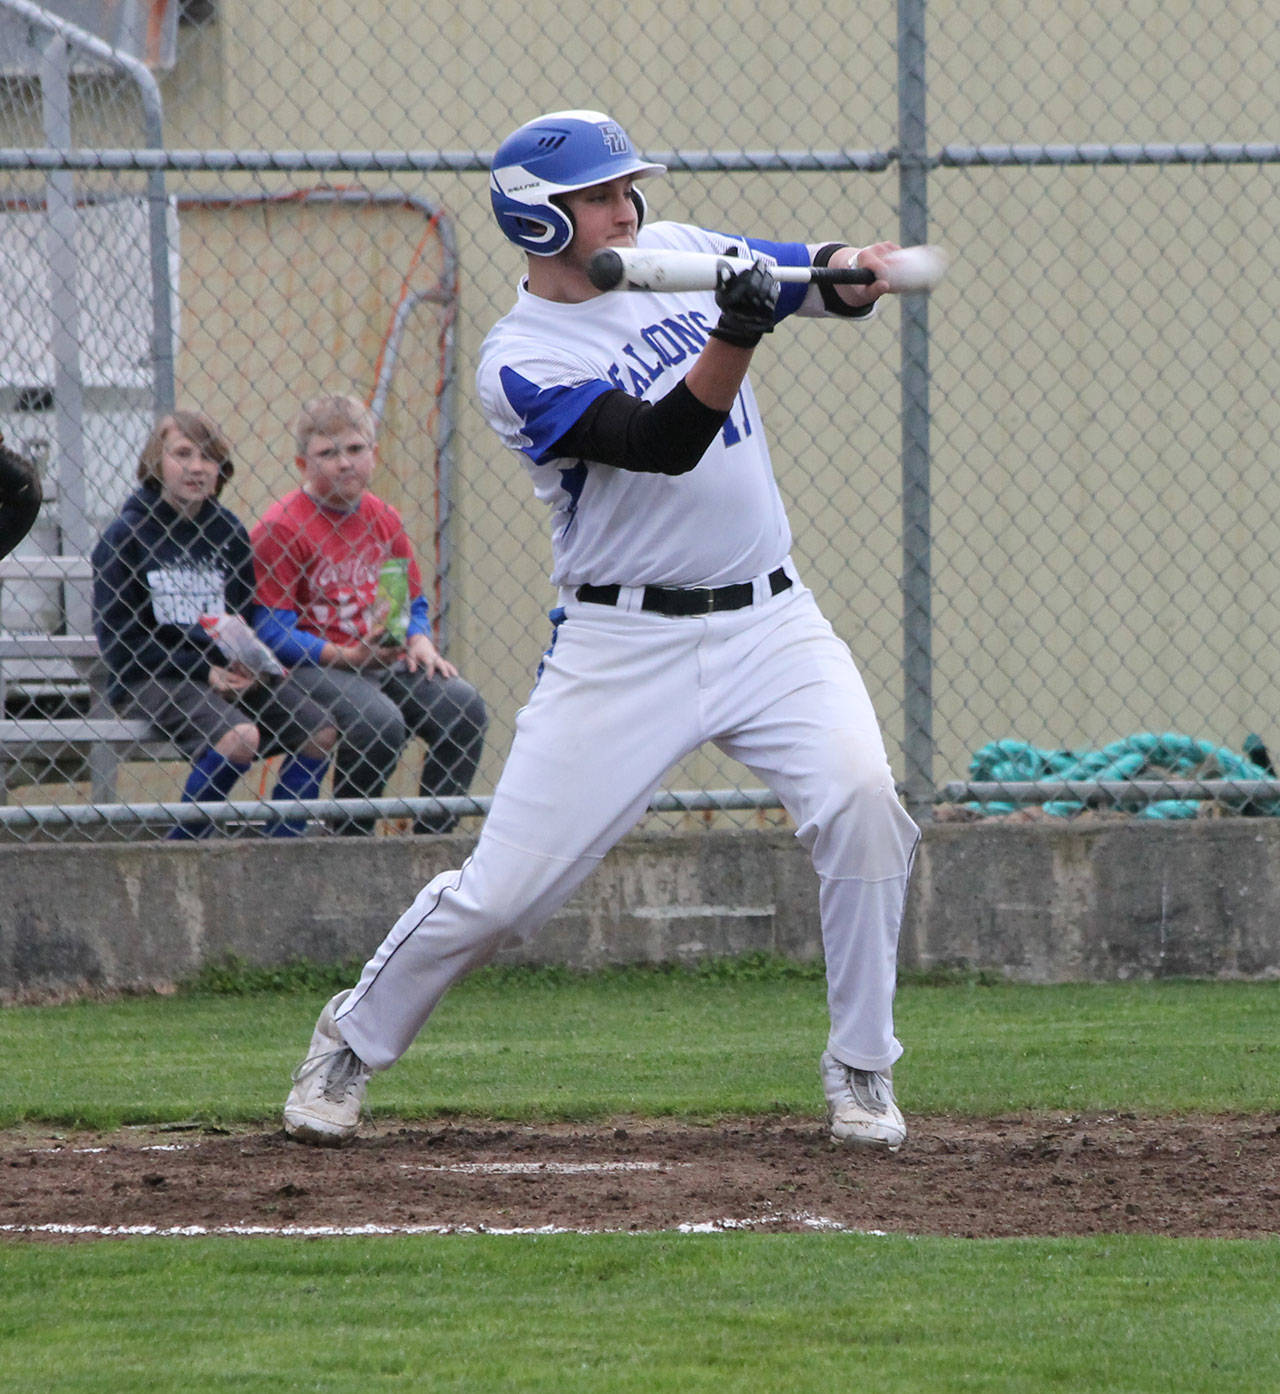 Brent Batchelor puts down a squeeze bunt to drive in South Whidbey’s first run.(Photo by Jim Waller/South Whidbey Record)